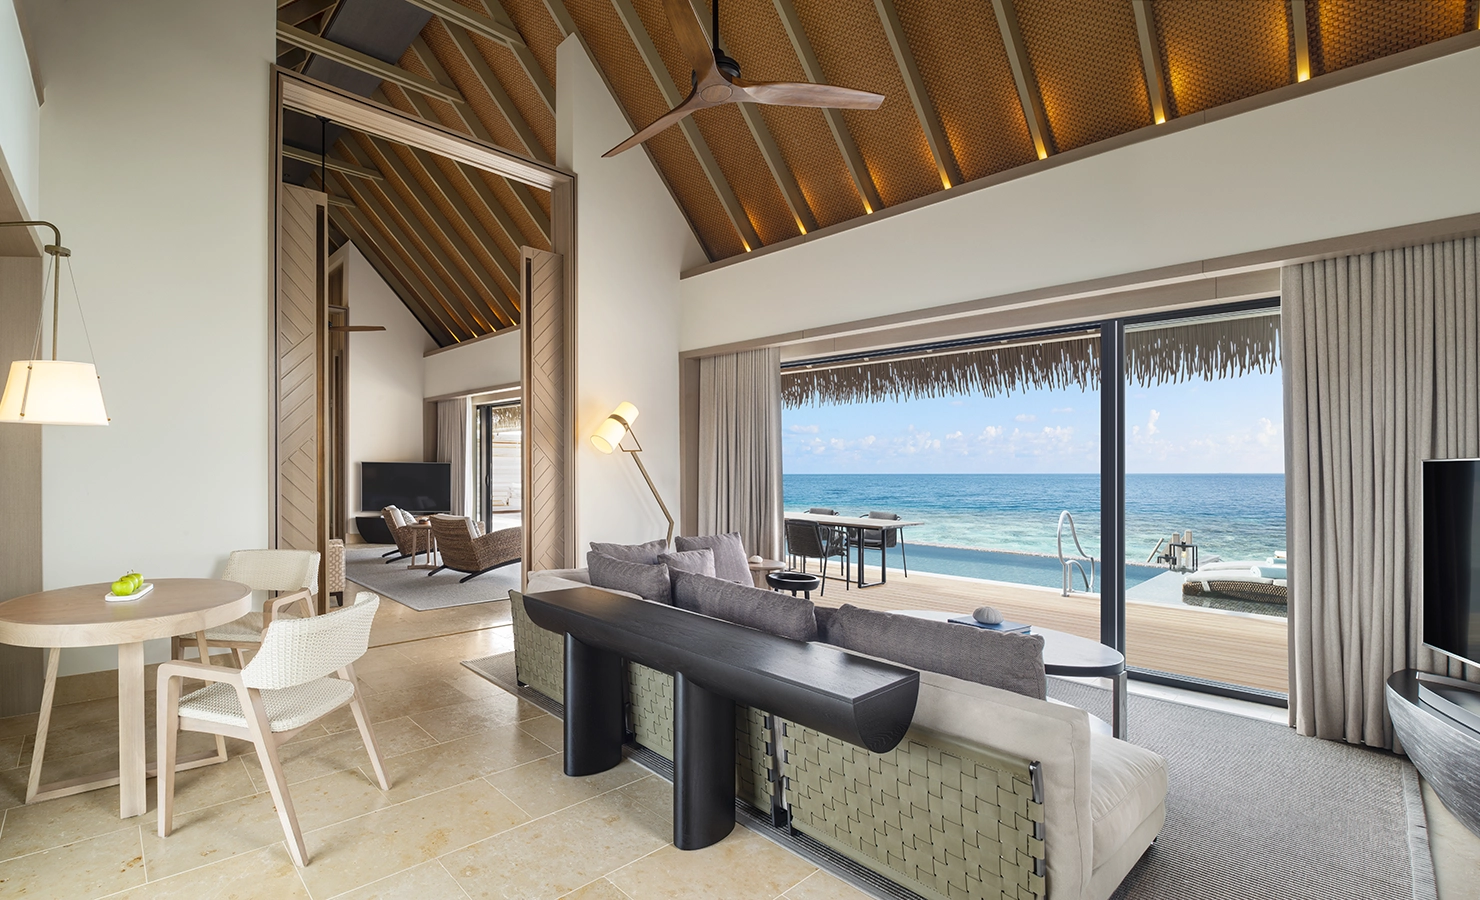 Perfect Hideaways, Waldorf Maldives, Luxury accommodation sitting room with a view of the ocean